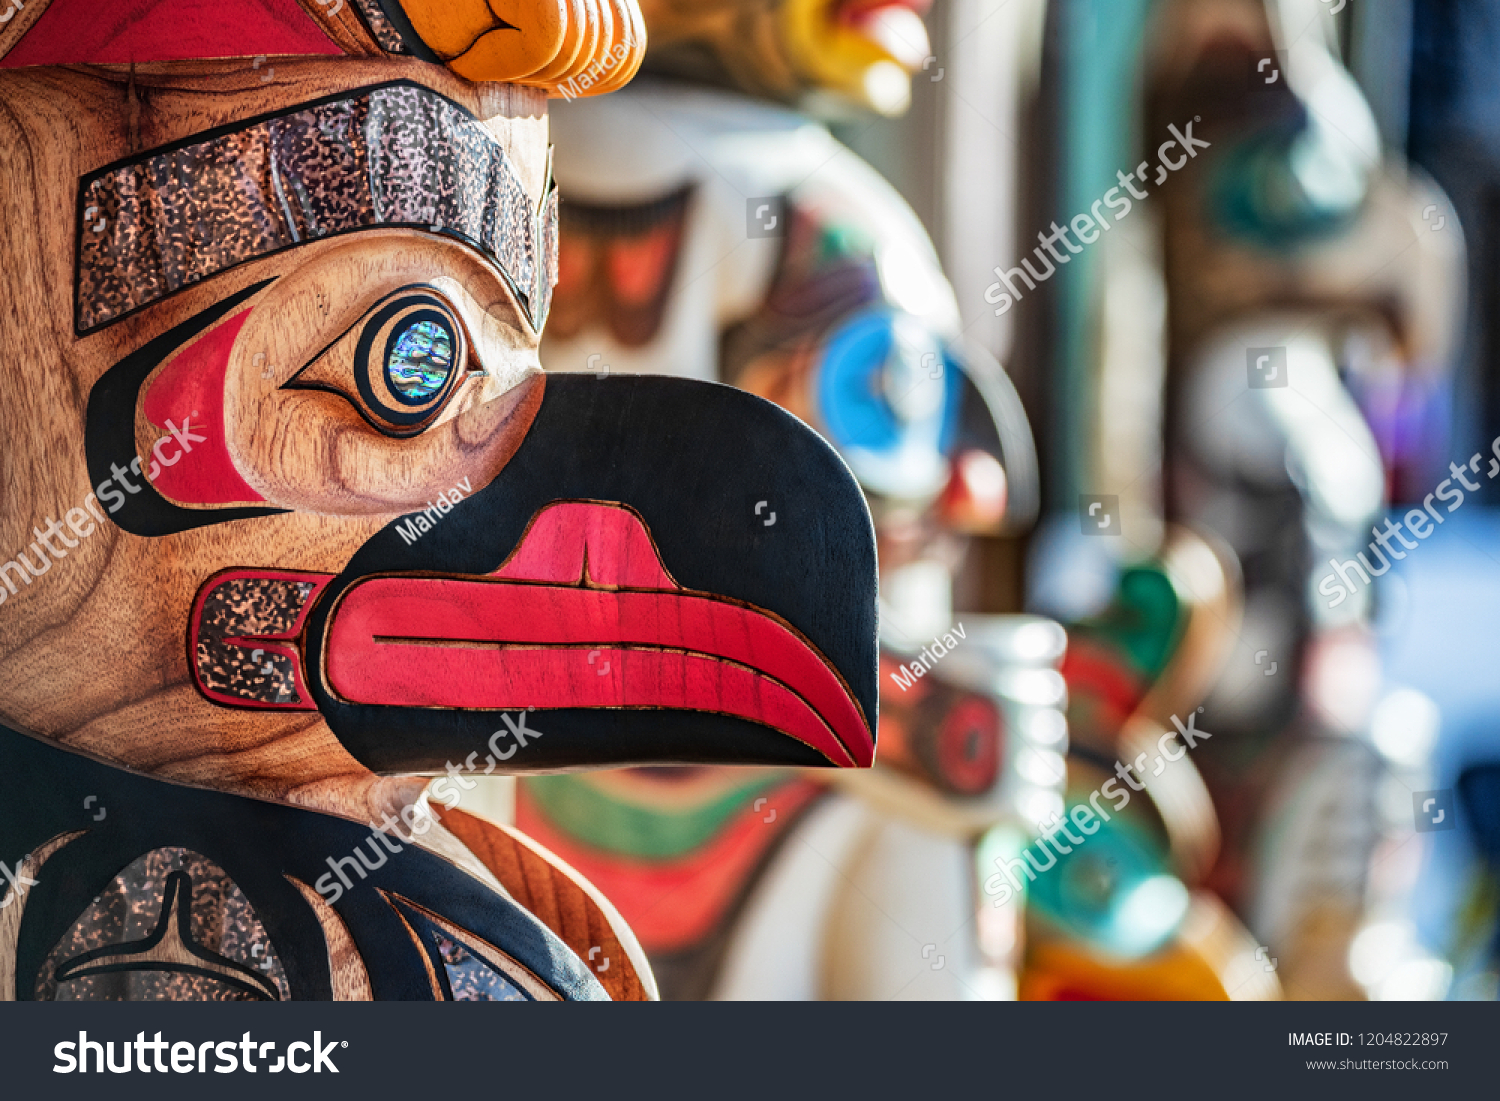 Alaska totem pole carving art sculture store in tourist travel attraction town on Alaska cruise. Ketchikan, Juneau, Skagway stores and shops selling native paintings and art. Closeup of an Eagle. #1204822897